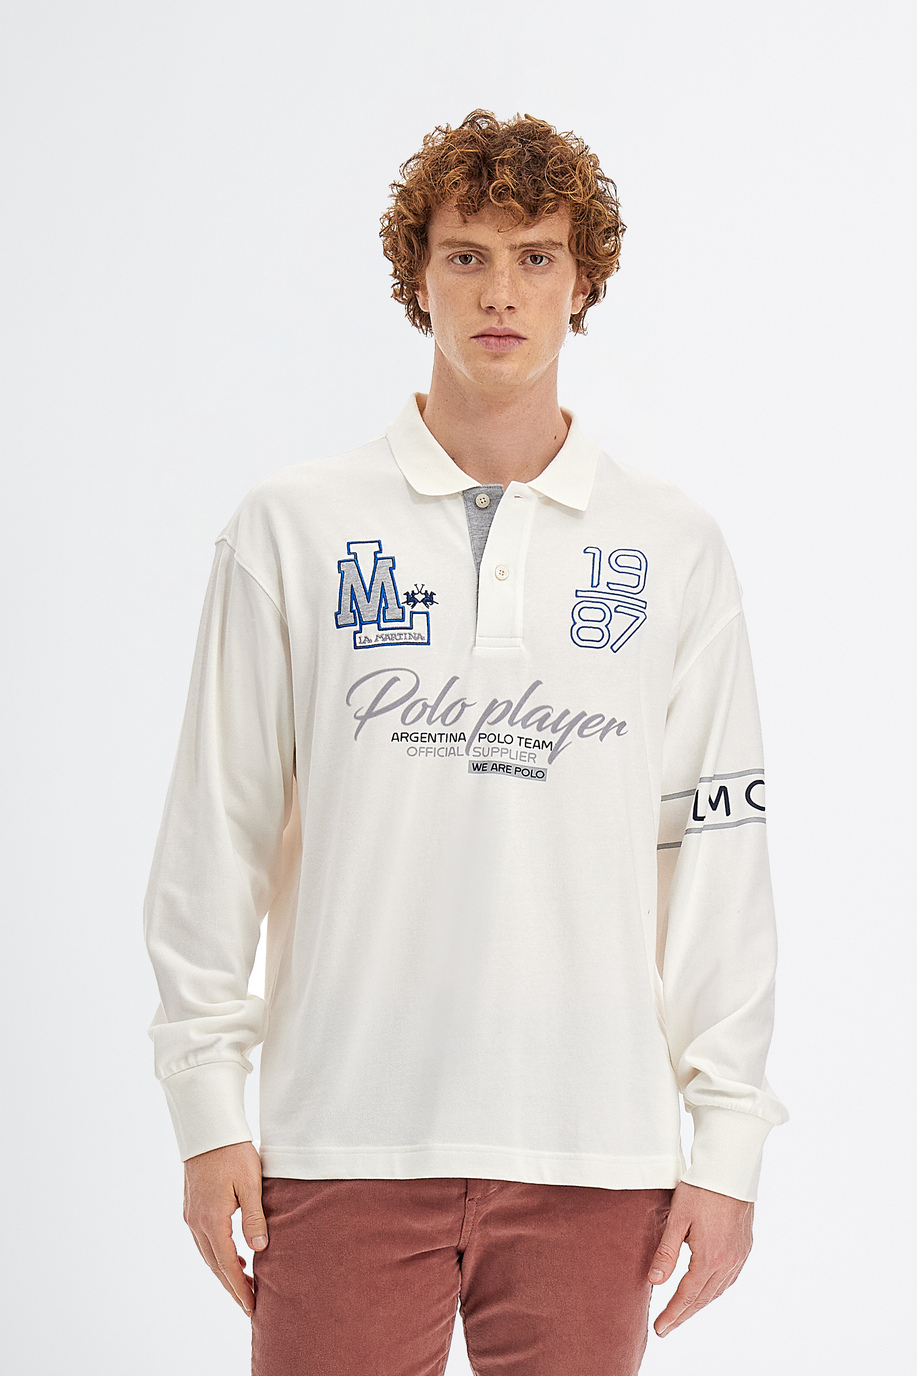 Men’s polo shirt Inmortales in cotton jersey comfort fit long sleeves - Replicas of major tournaments | La Martina - Official Online Shop